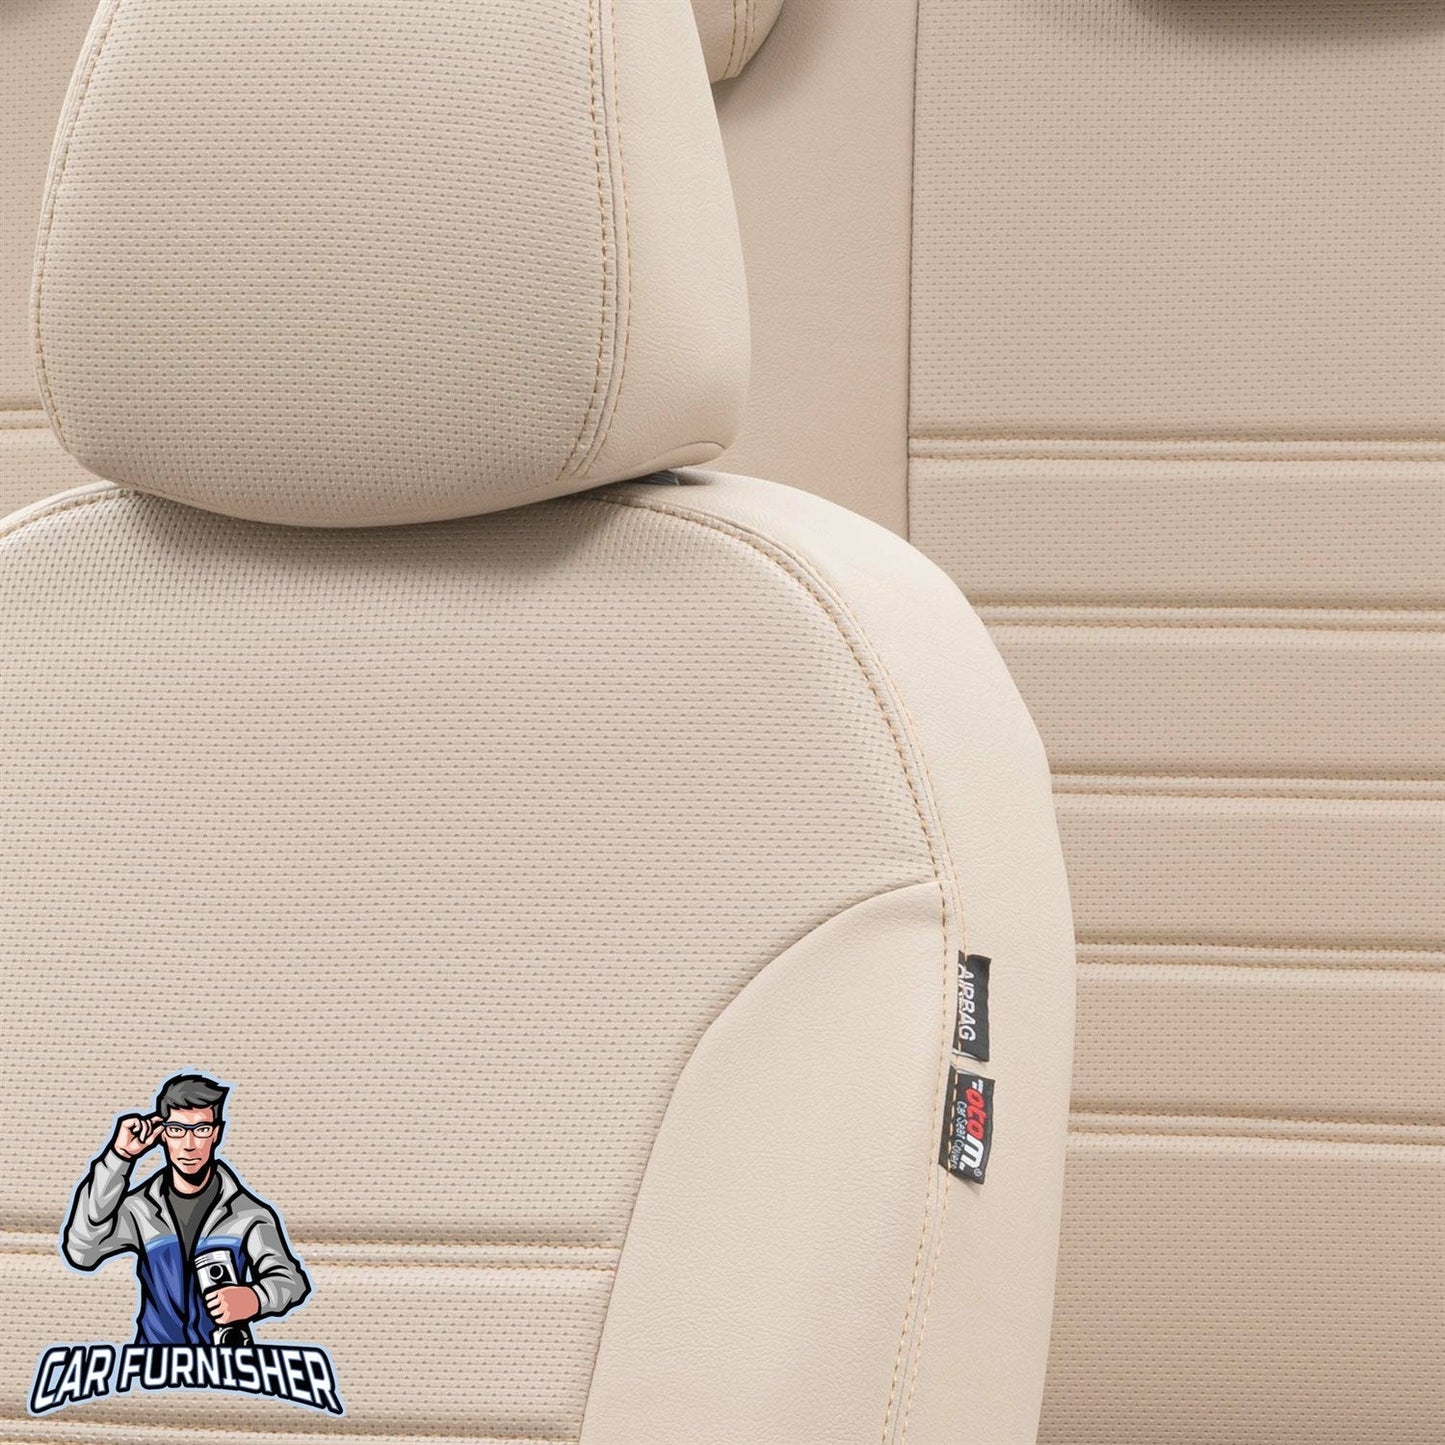 Opel Zafira Seat Covers New York Leather Design Beige Leather